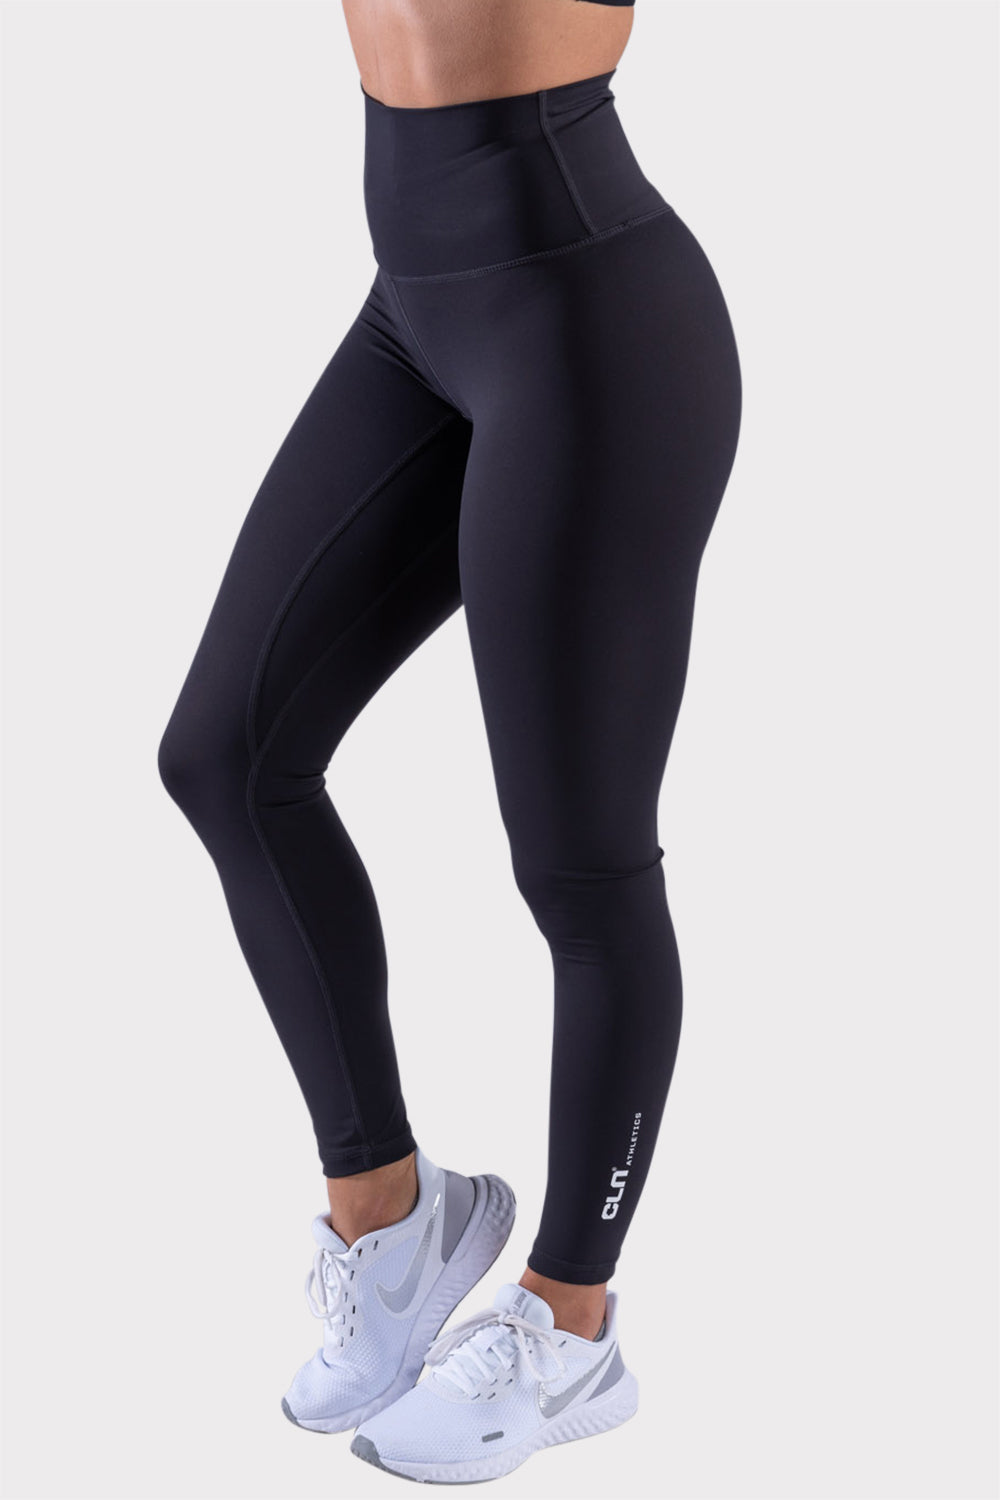 CLN Fuse W Tights - Fekete